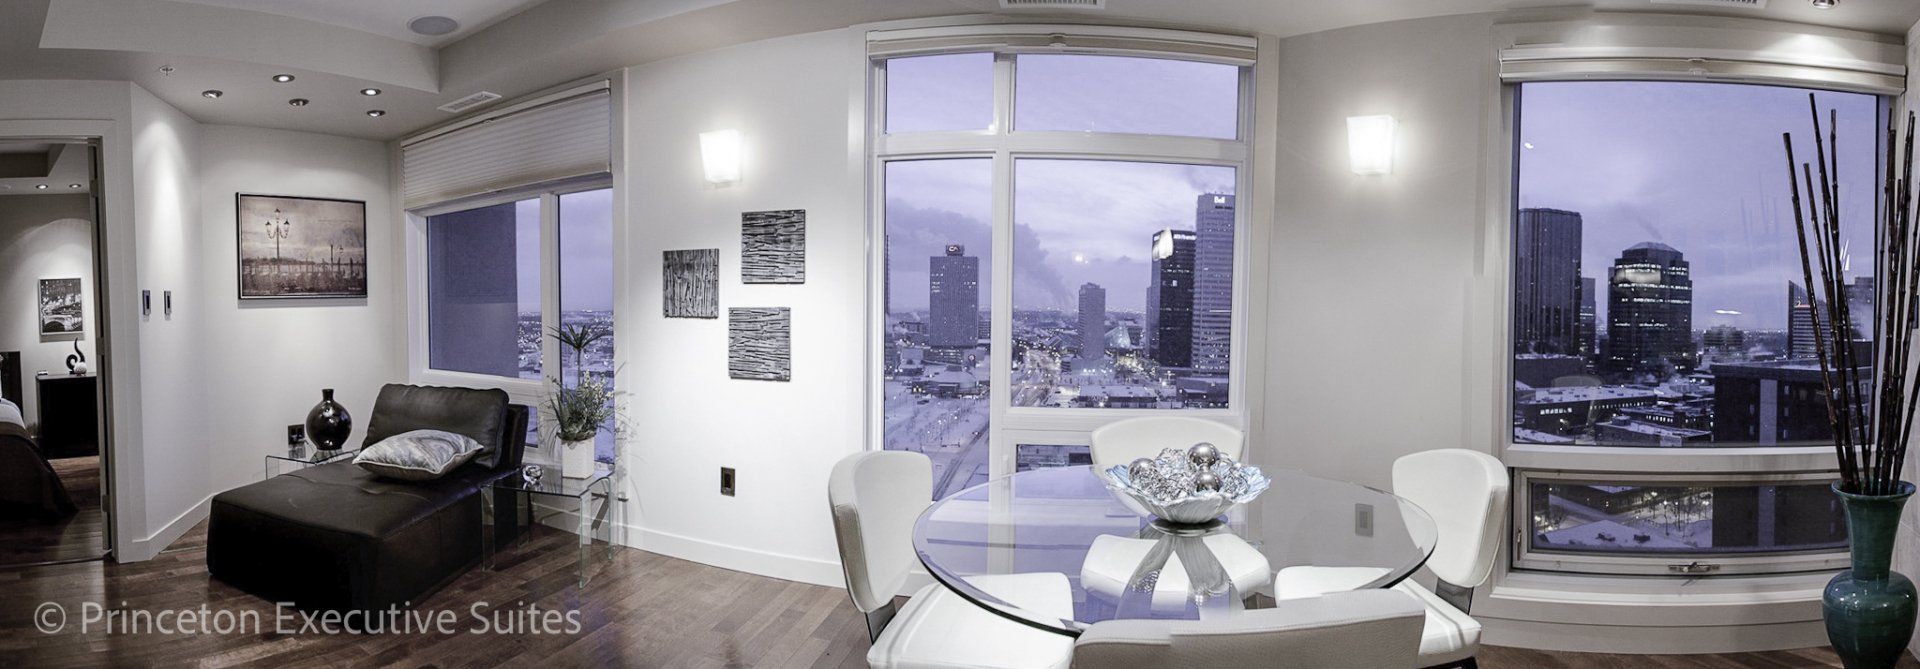 Wide shot of a edmonton luxury furnished suite with white leather dinette and chaise lounge beside ceiling to floor windows